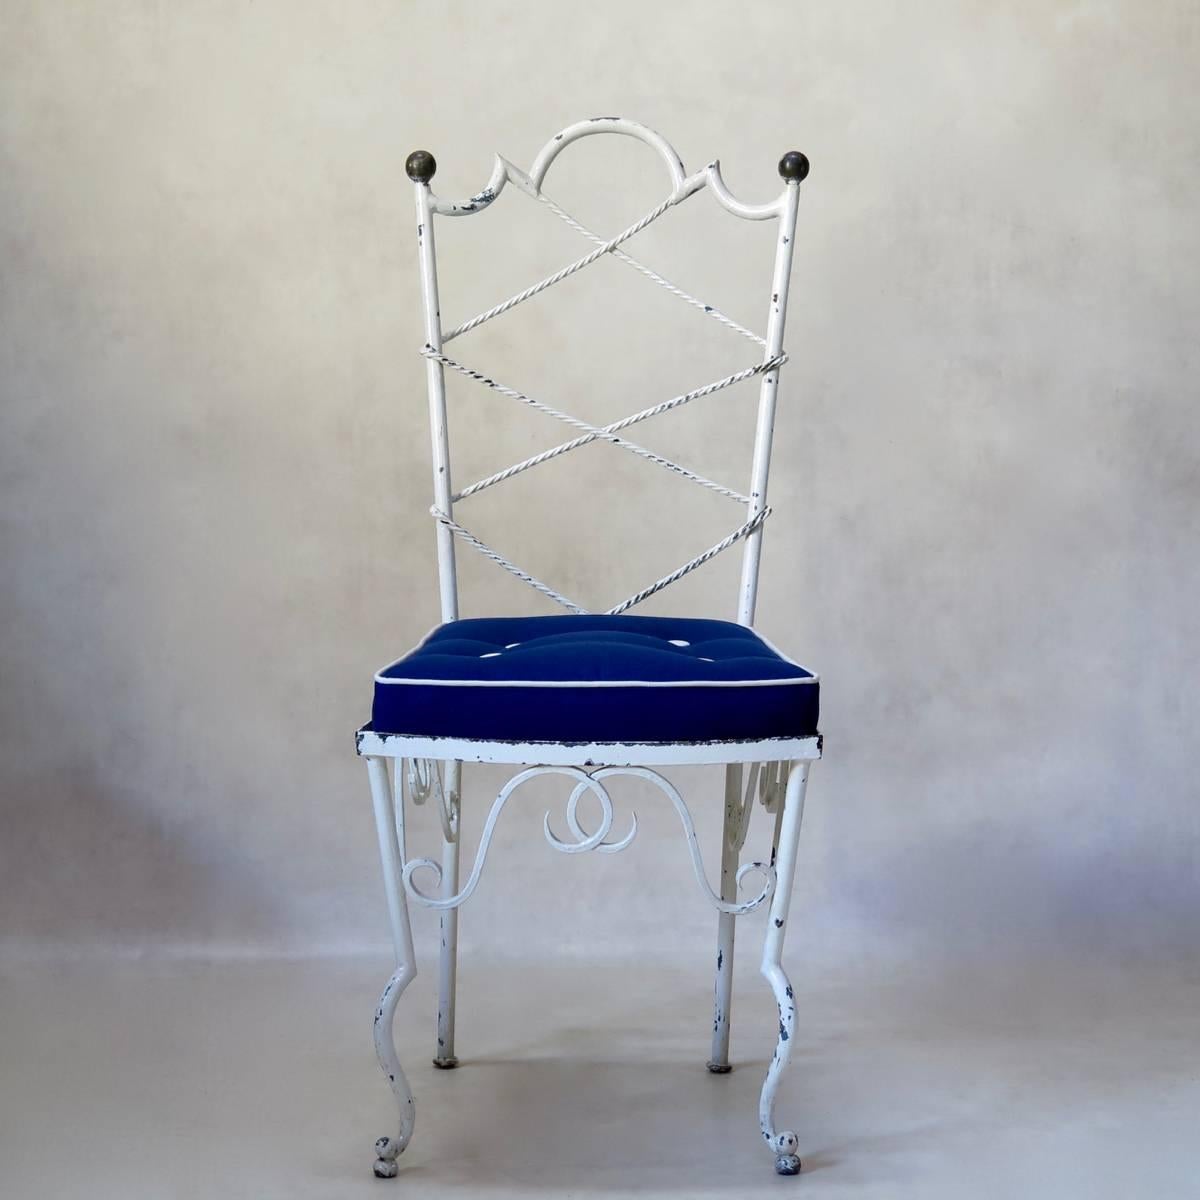 Chic set of six painted wrought iron garden chairs in the style of Gilbert Poillerat. The backs have laced cord detail, and brass ball finials. Typical cross-bow shaped front legs. Upholstered in blue and white outdoor canvas fabric.